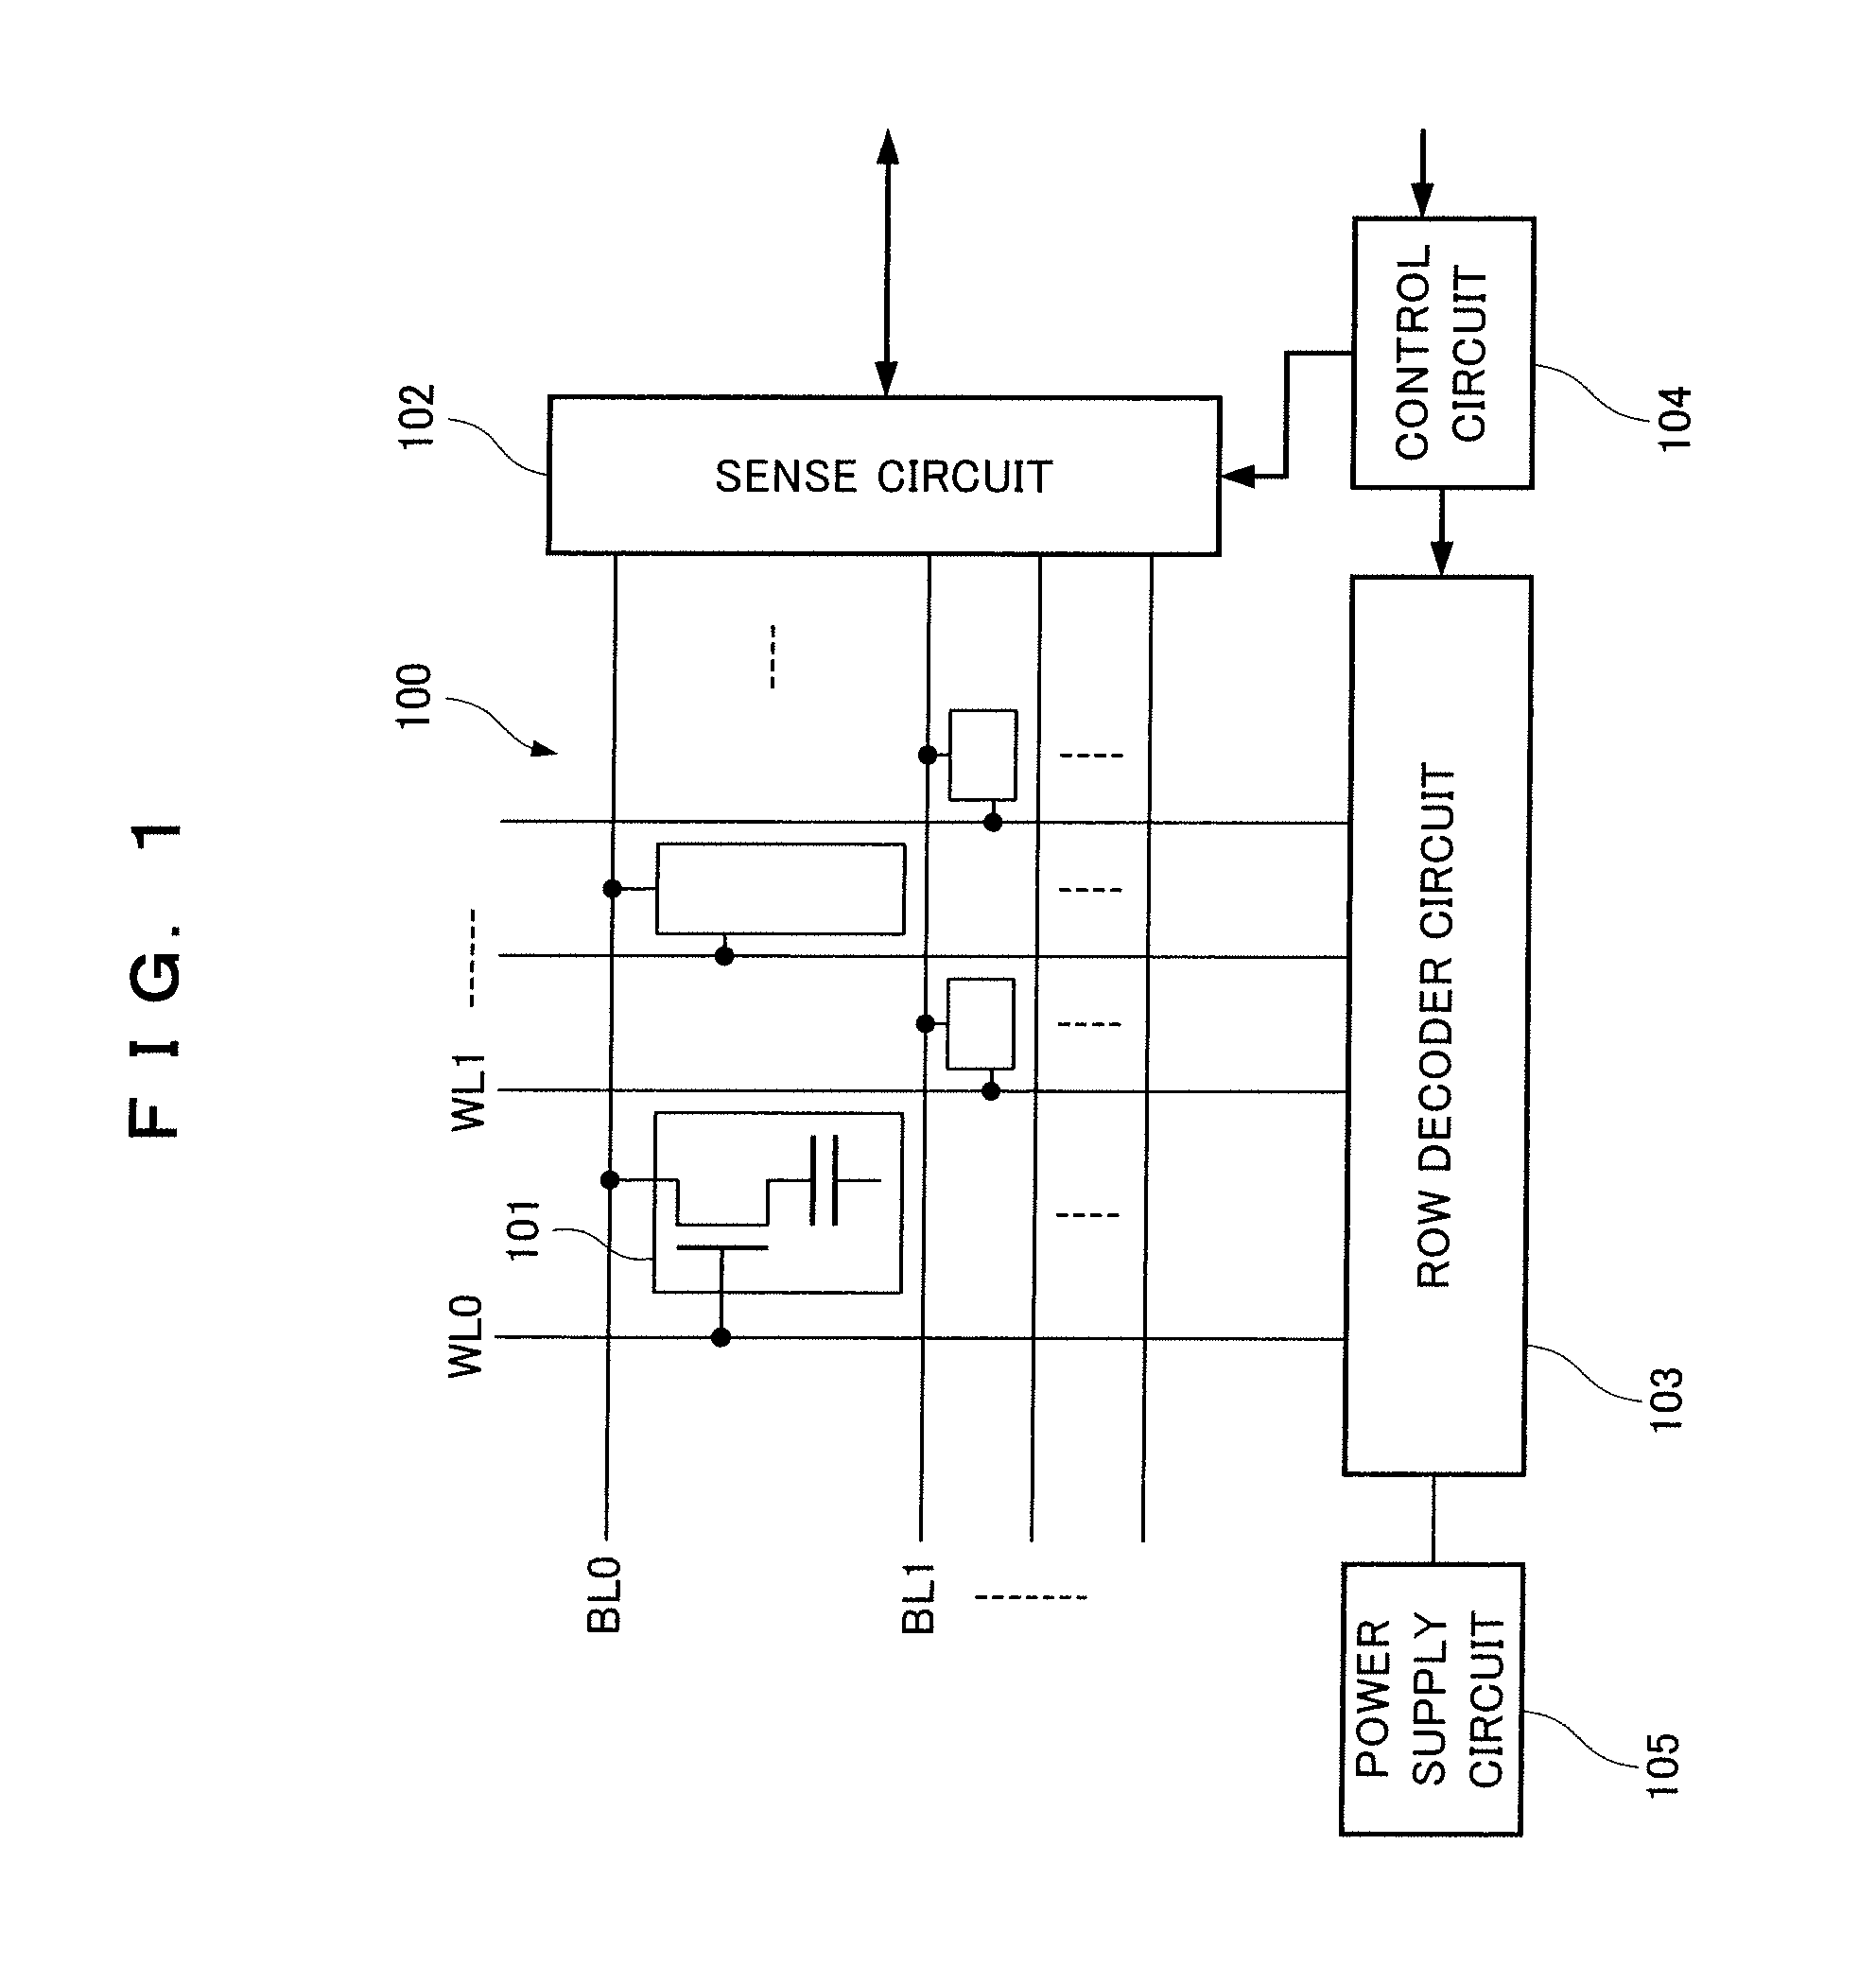 Semiconductor storage device incorporated into a system LSI with finer design rules